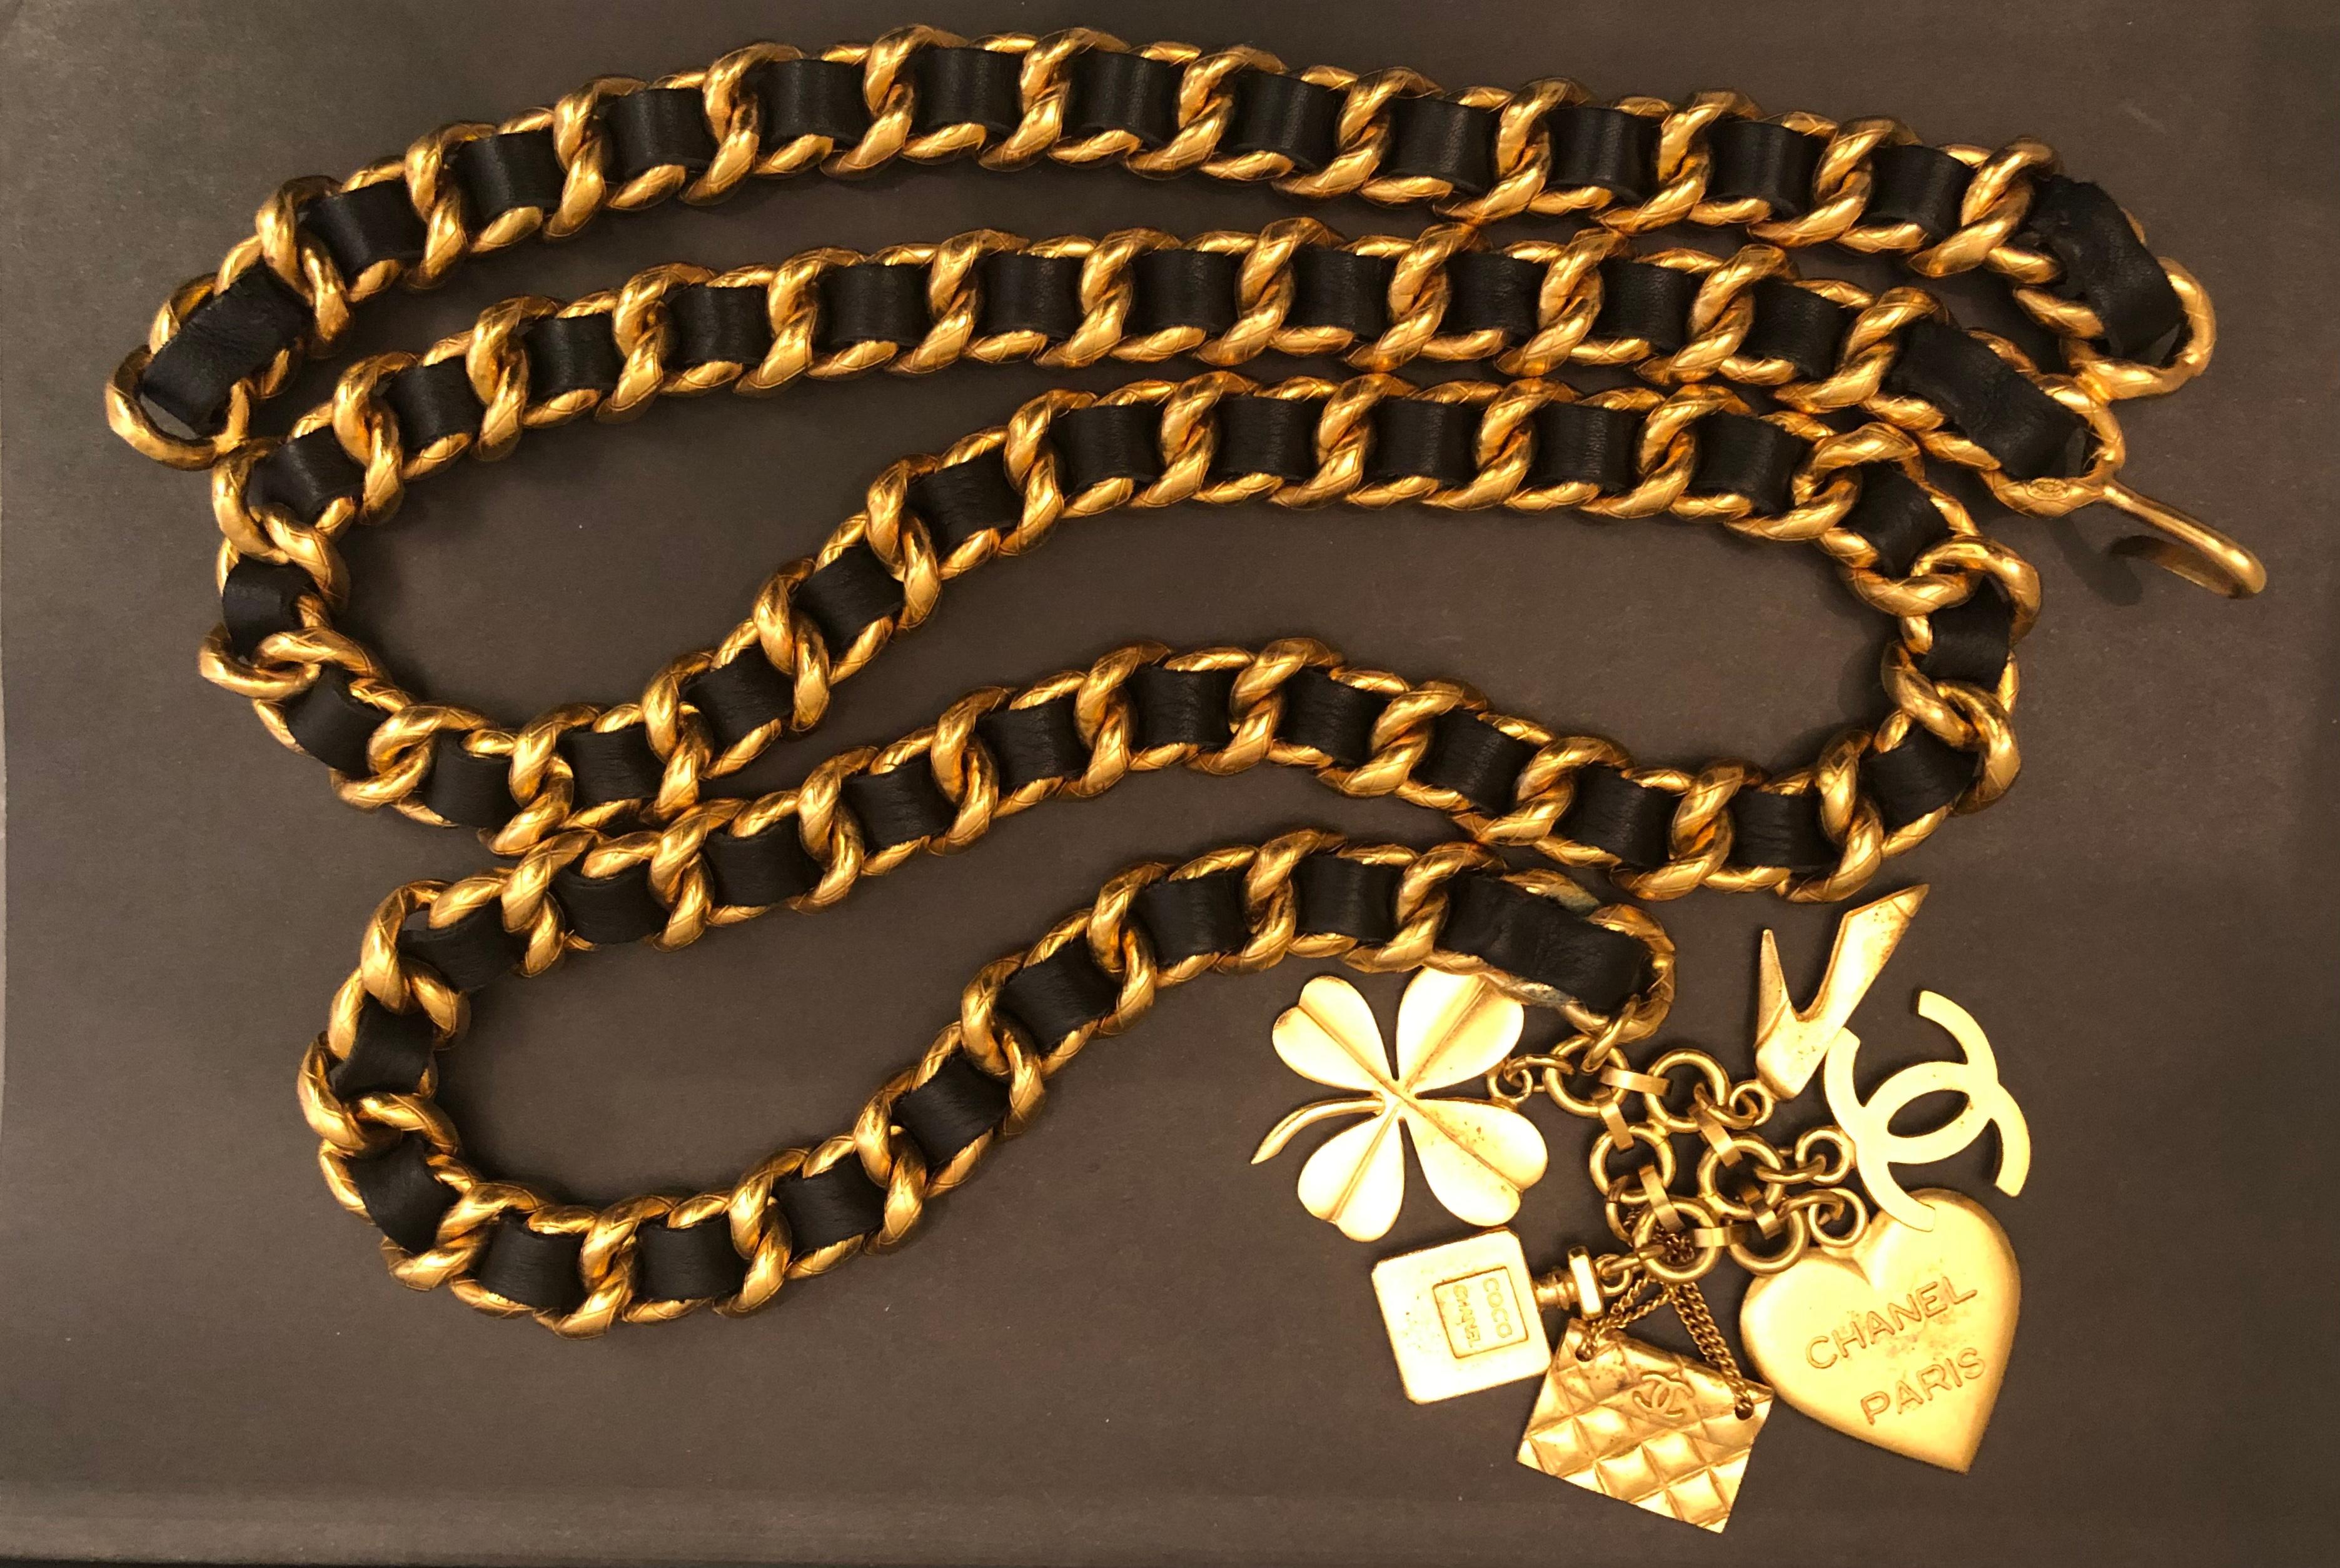 This vintage Chanel gold toned chain belt is crafted of sturdy gold toned chain in quilted pattern interlaced with black leather featuring six iconic Chanel charms. Stamped Chanel 95A made in France. Adjustable hook fastening. Chain measures